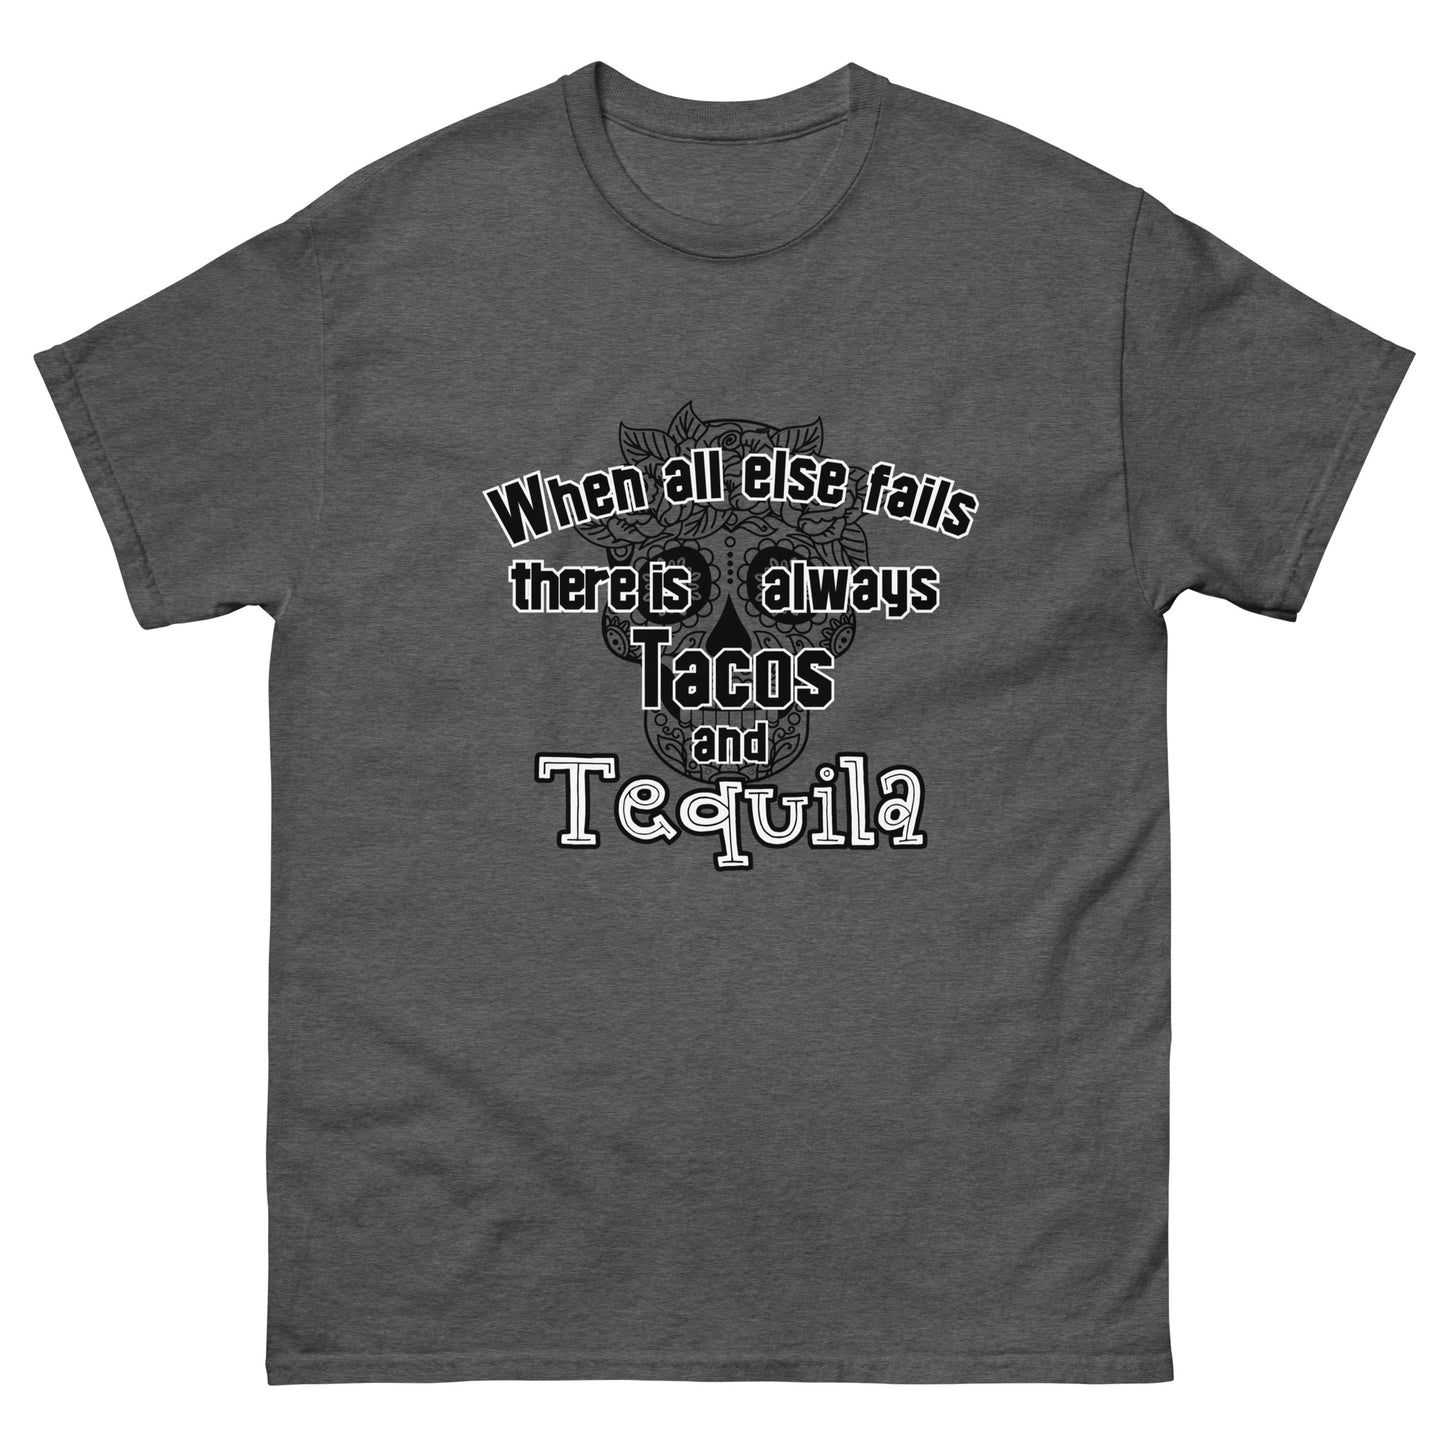 When all else fails there is always tacos and tequila Men's Tee